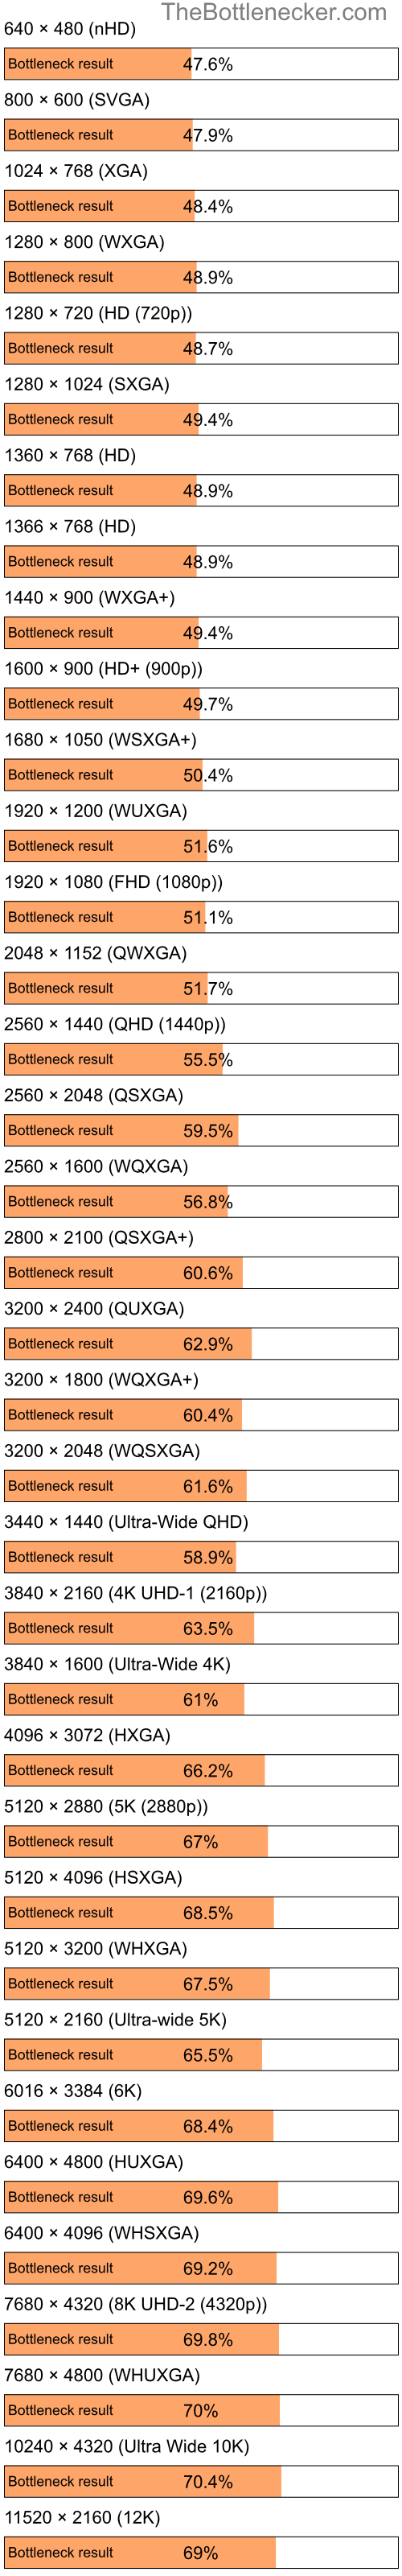 Bottleneck results by resolution for Intel Pentium 4 and AMD Mobility Radeon X1700 in Processor Intense Tasks